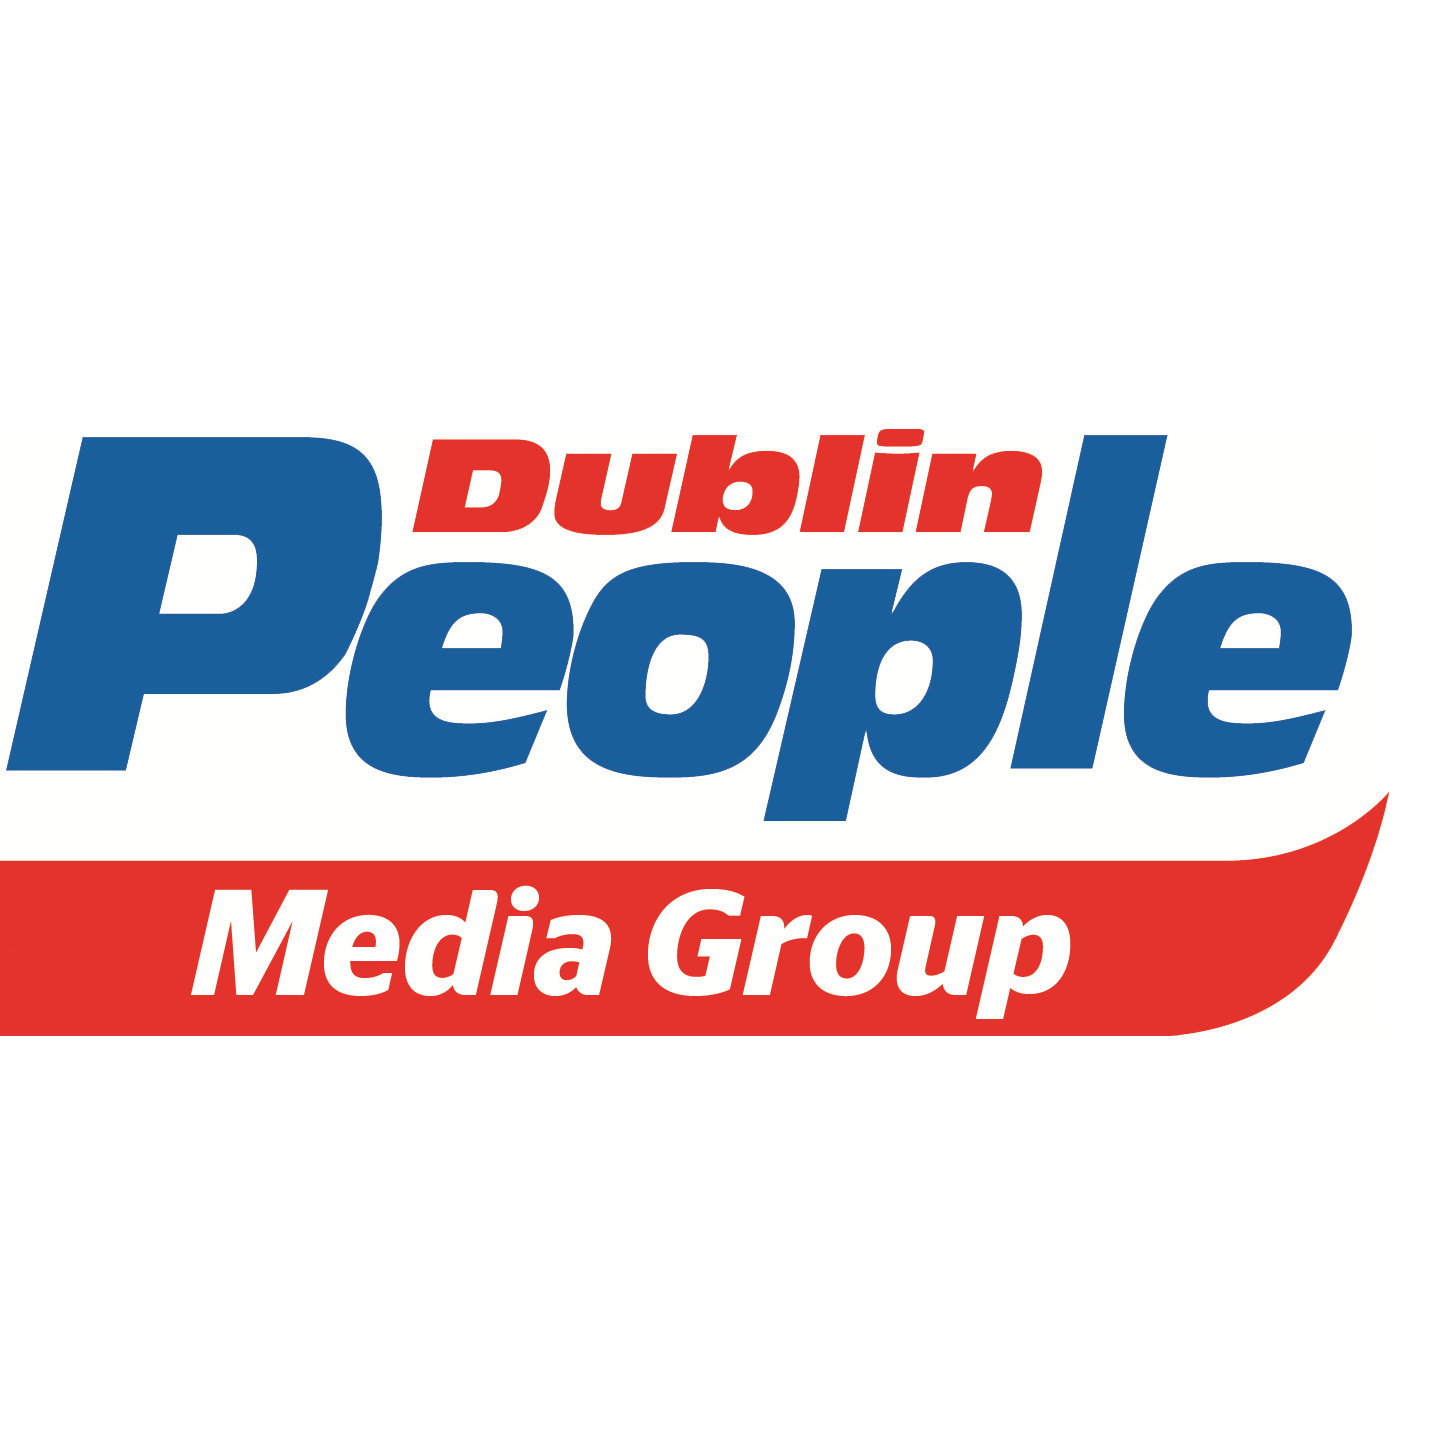 The Dublin People Group